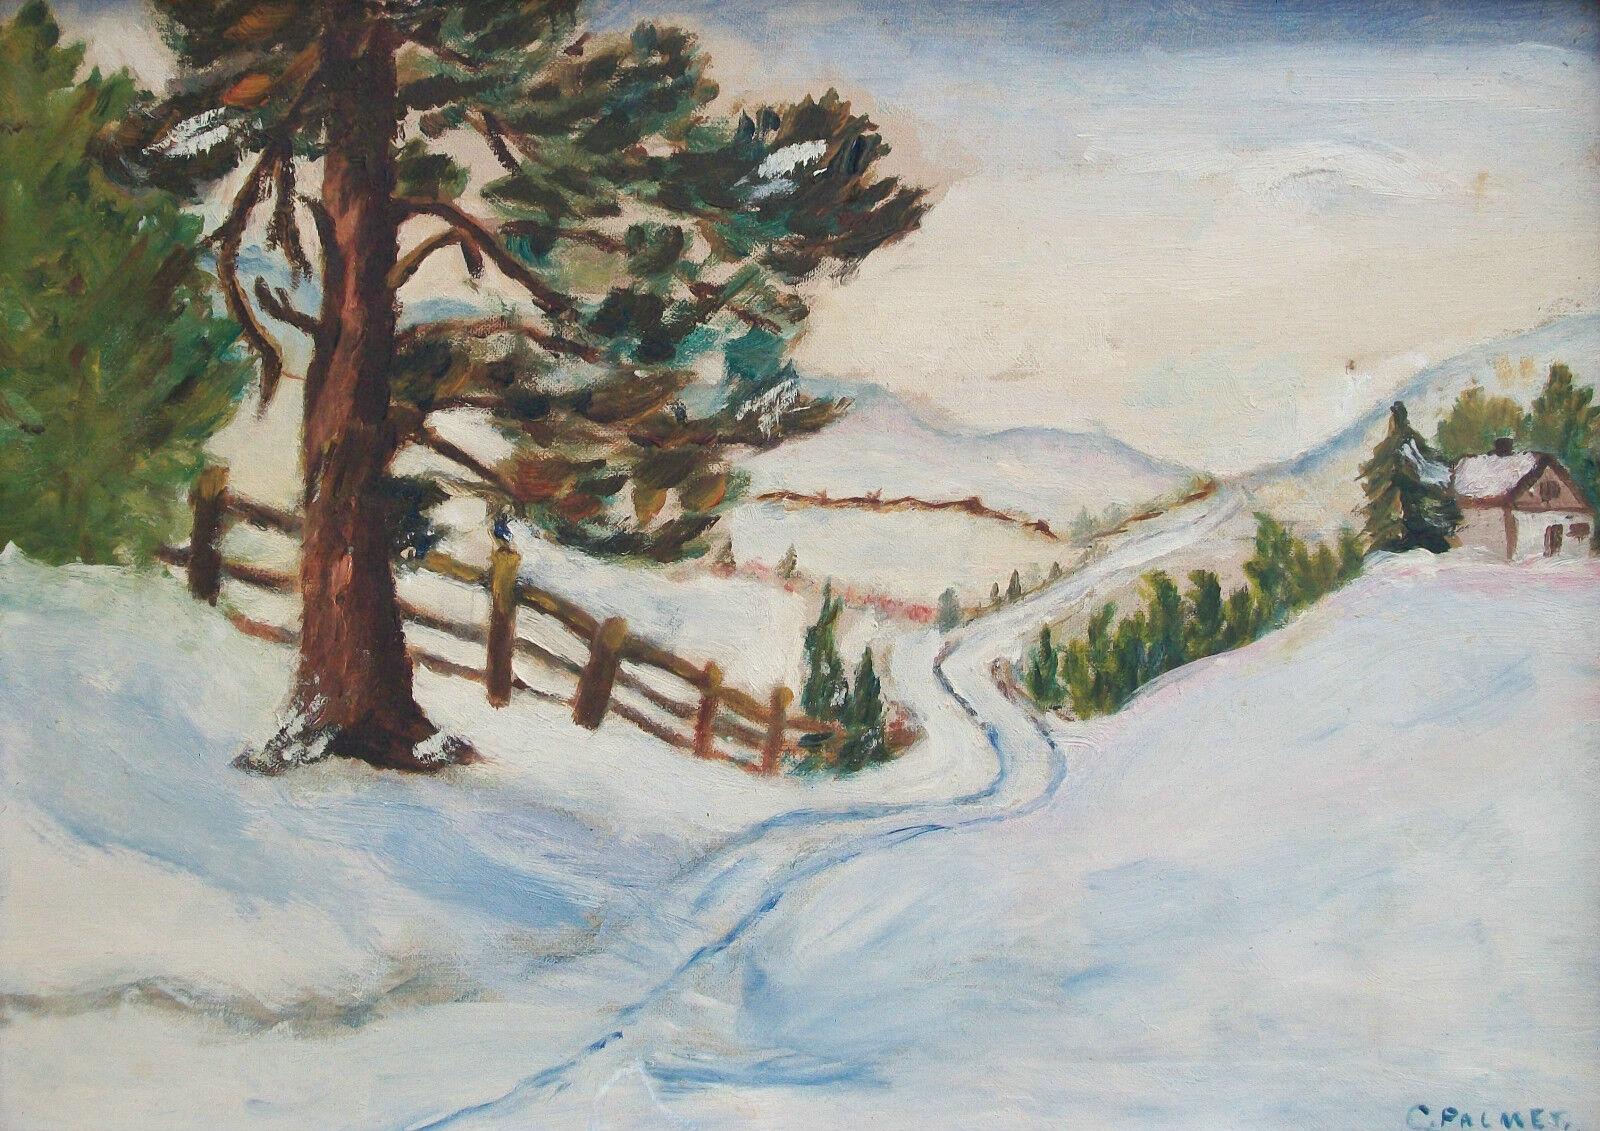 C. PALMER - Impressionist style winter landscape oil painting on panel - signed lower right - vintage frame - gallery label verso - Canada - early 20th century.

Fair vintage condition - painting not viewed outside of the frame - scuffs/scrapes &